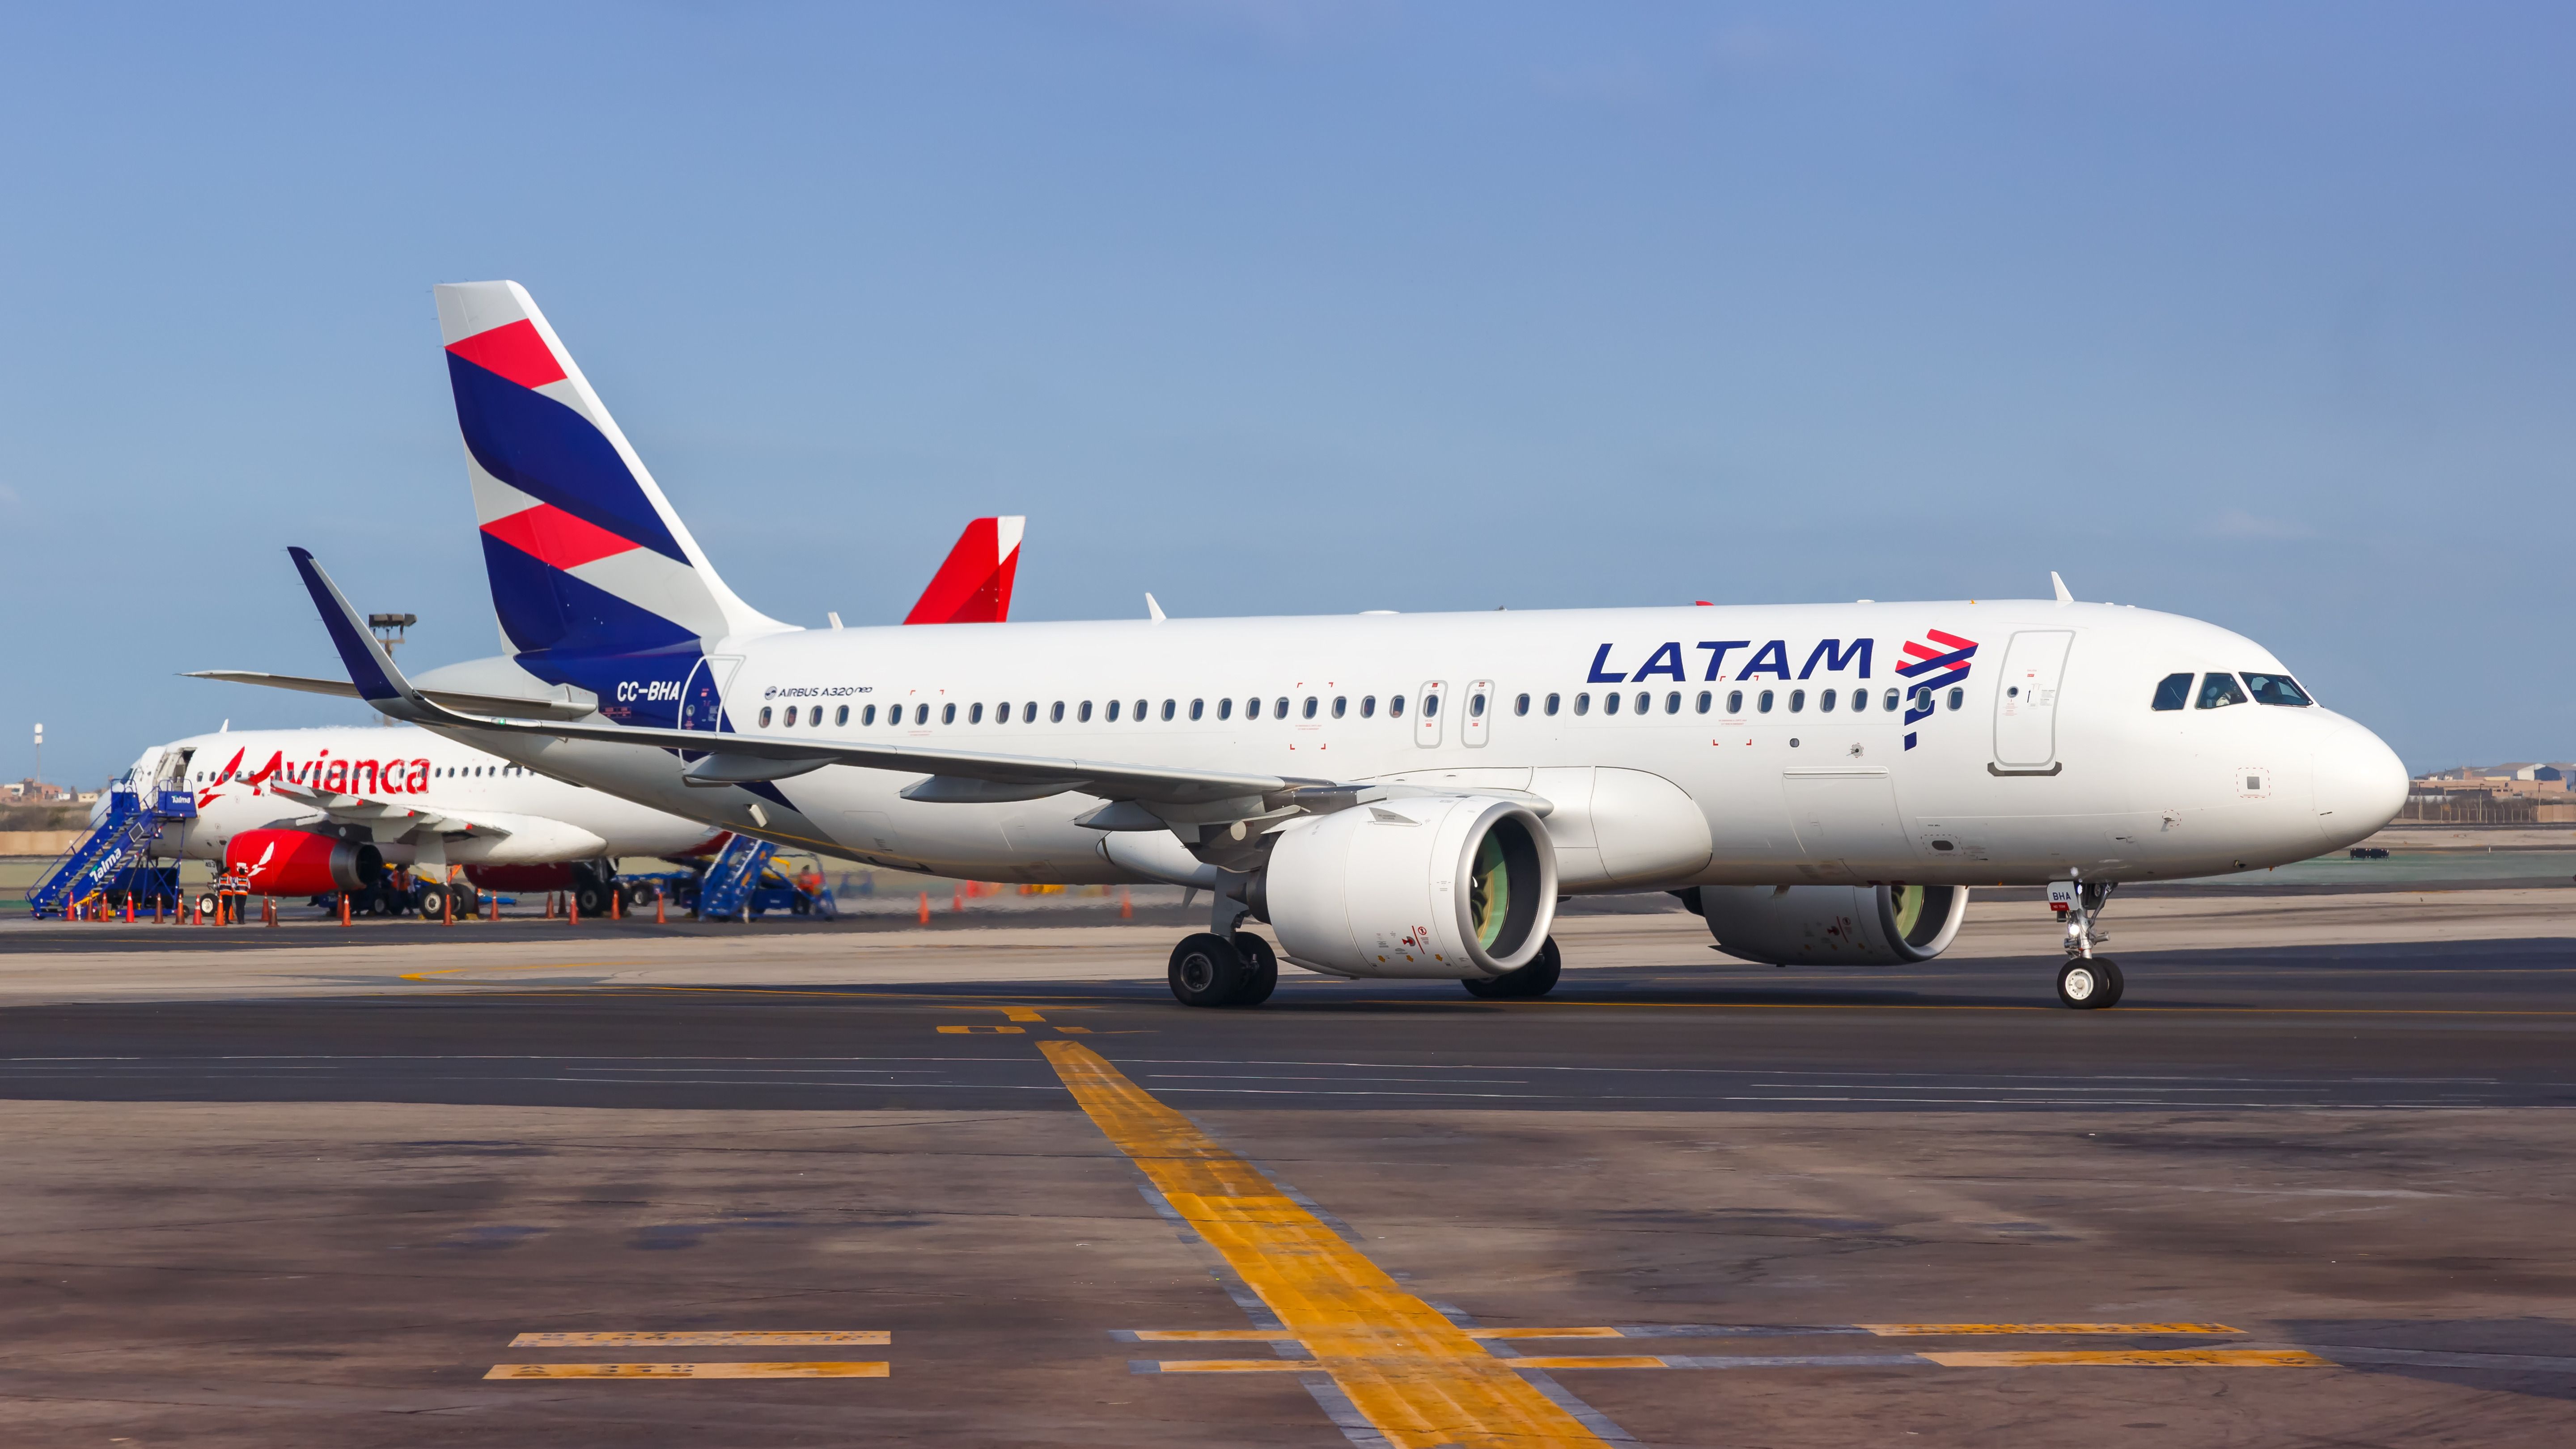 Unveiling the LATAM Airbus A320 PR-MAP Aviationtag Edition